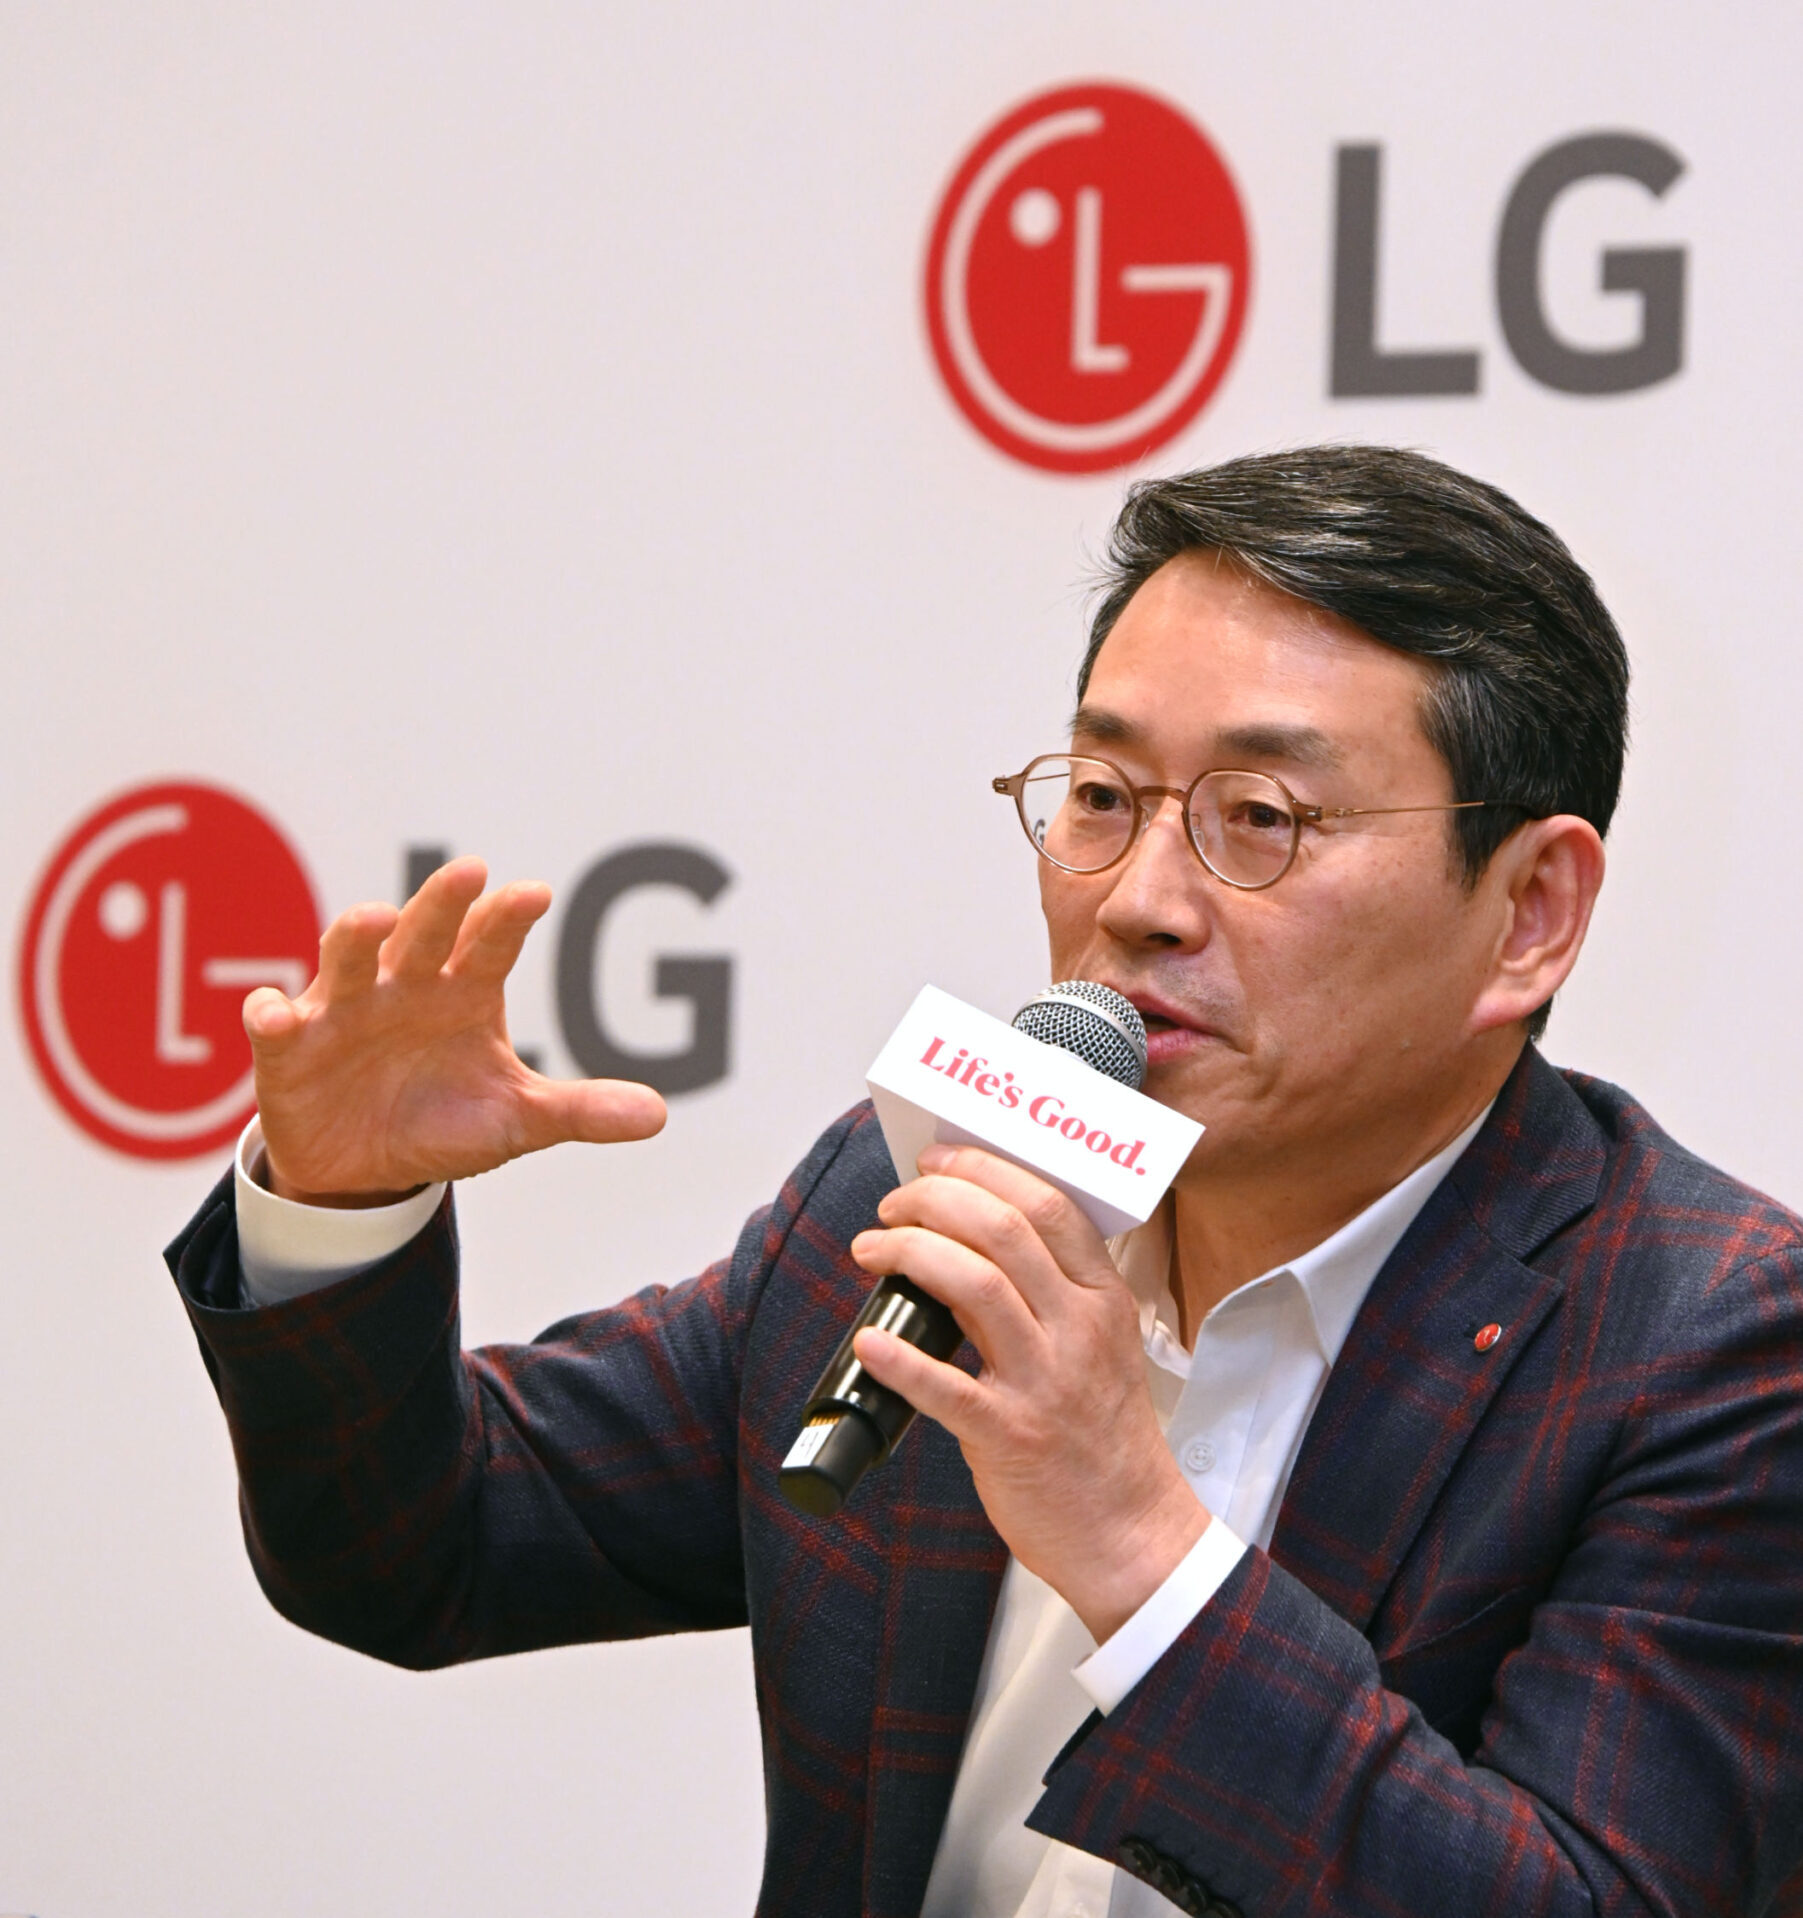 Lg Ceo And Executive Team Unveil Strategy To Reach ‘future Vision 2030’ Objective